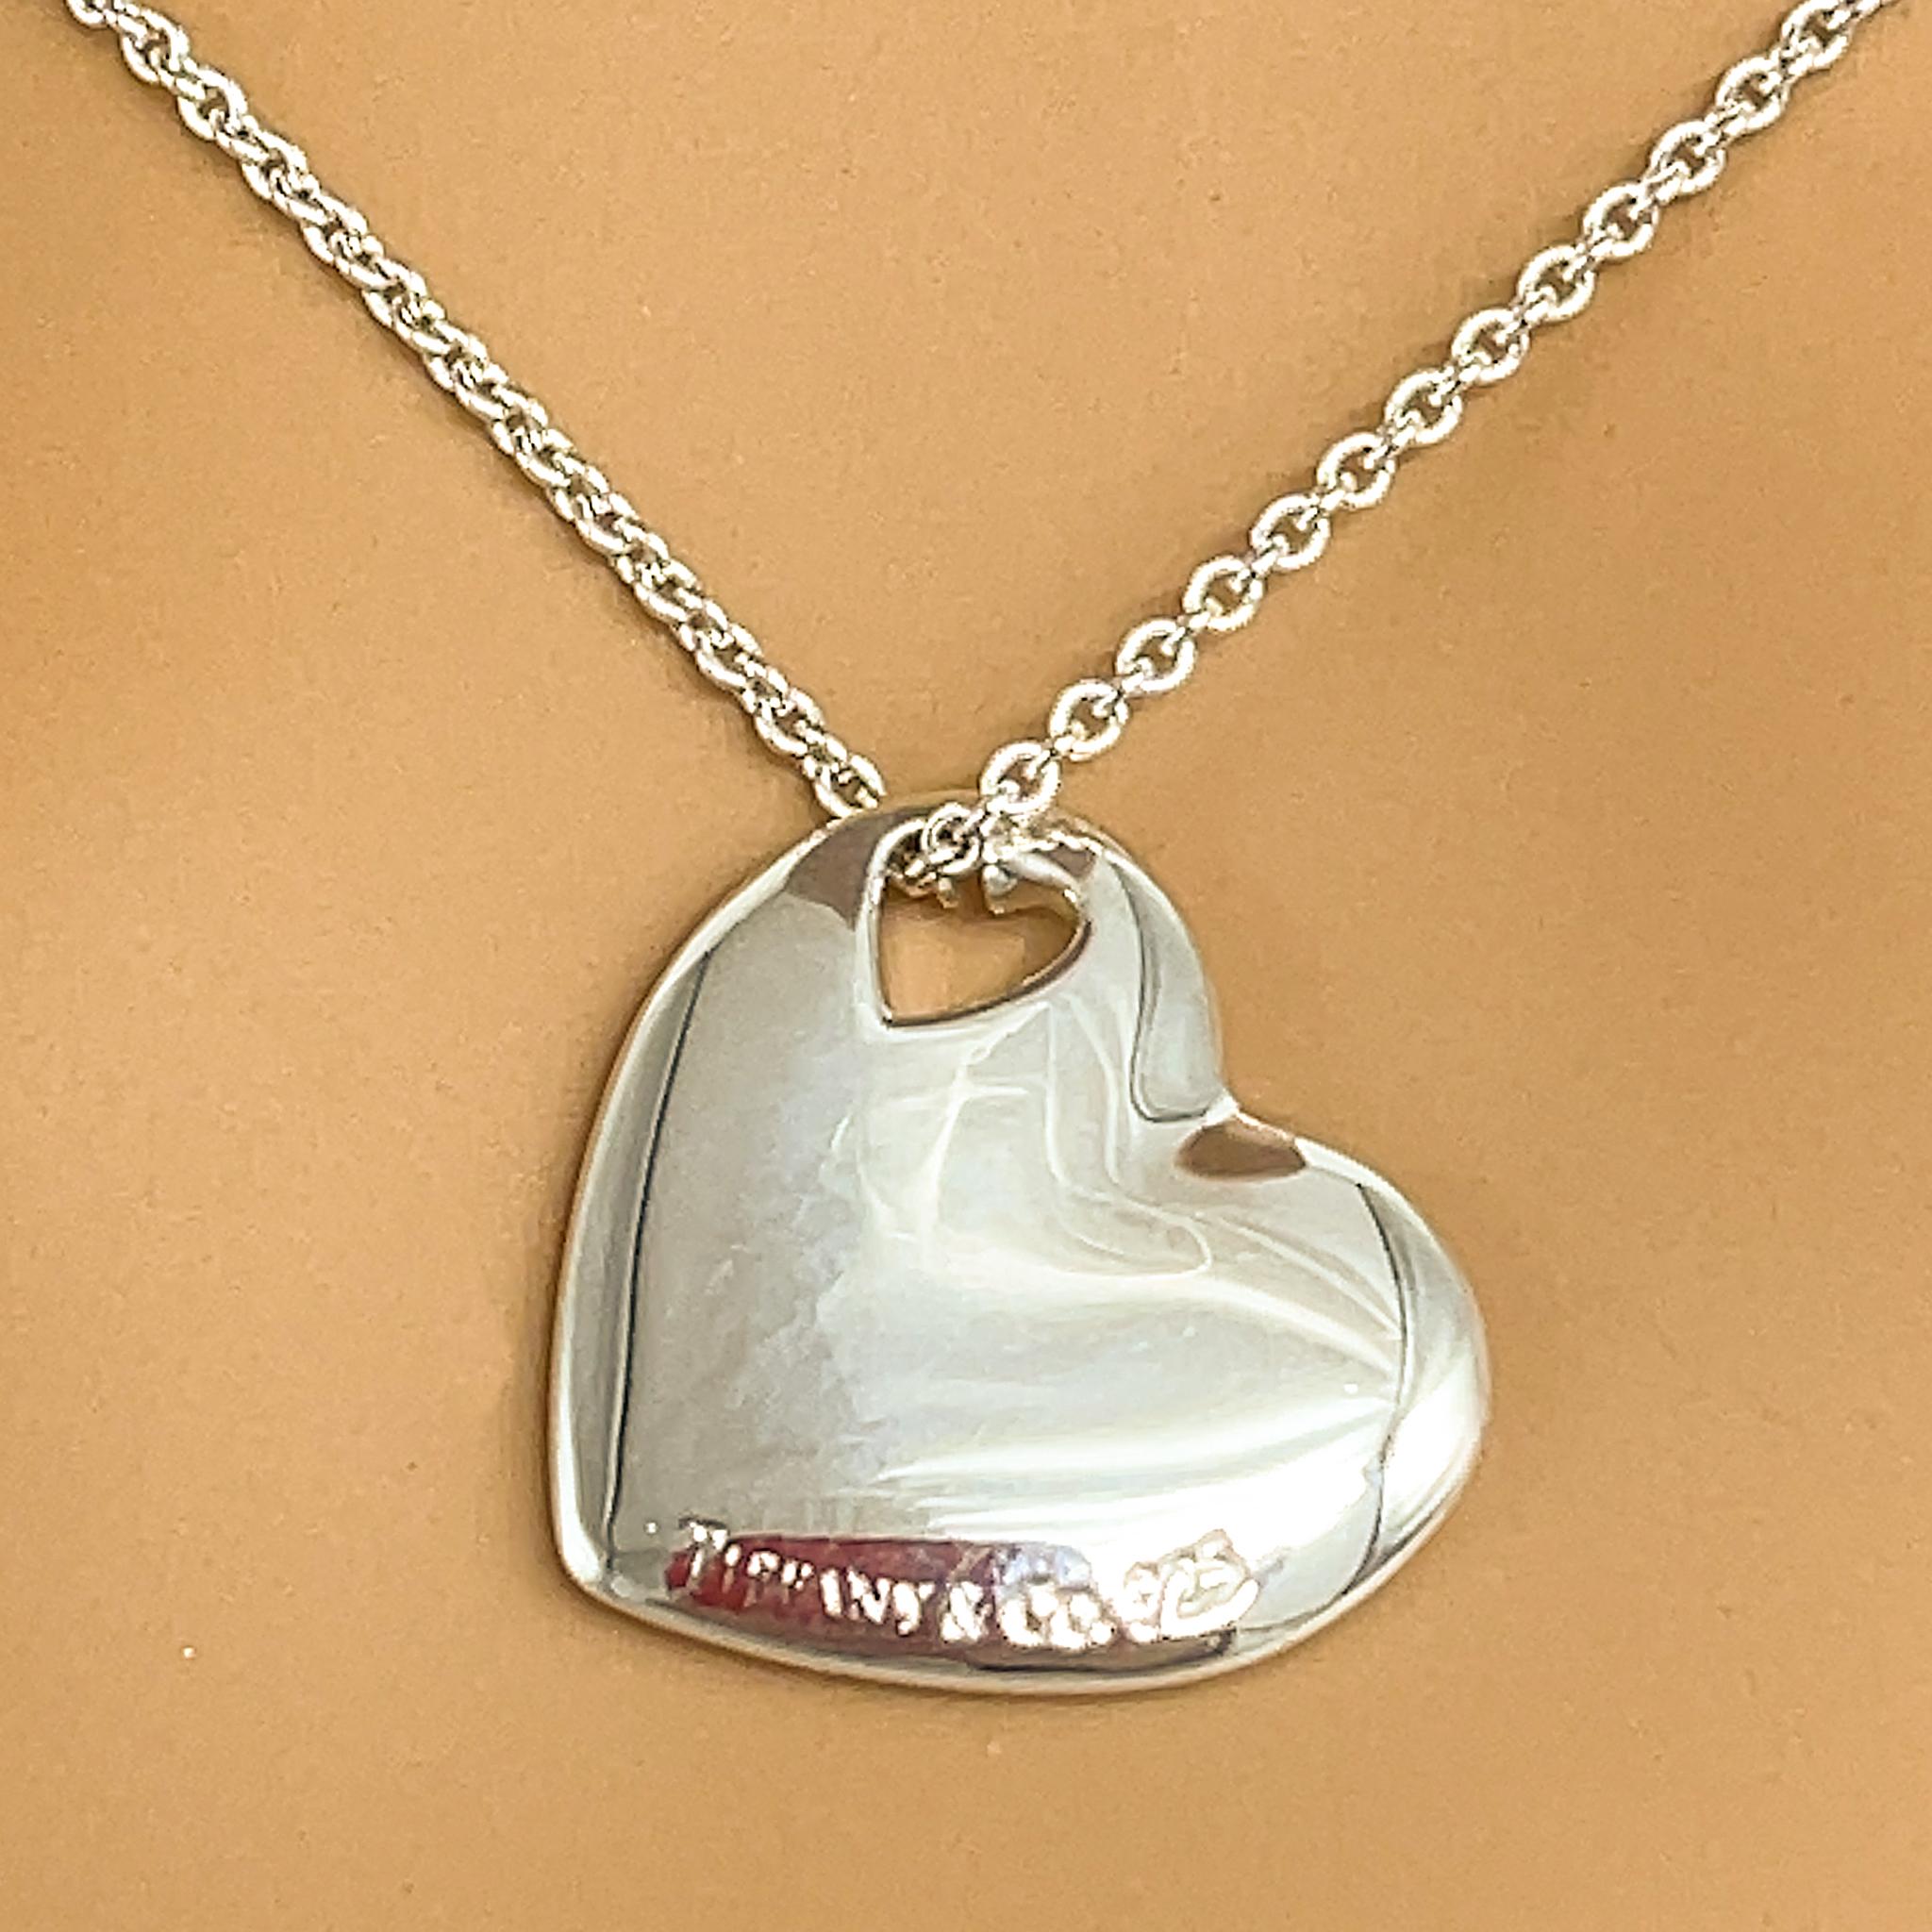 Tiffany and Co. Sterling Silver Cutout Heart Pendant Necklace For Sale 6